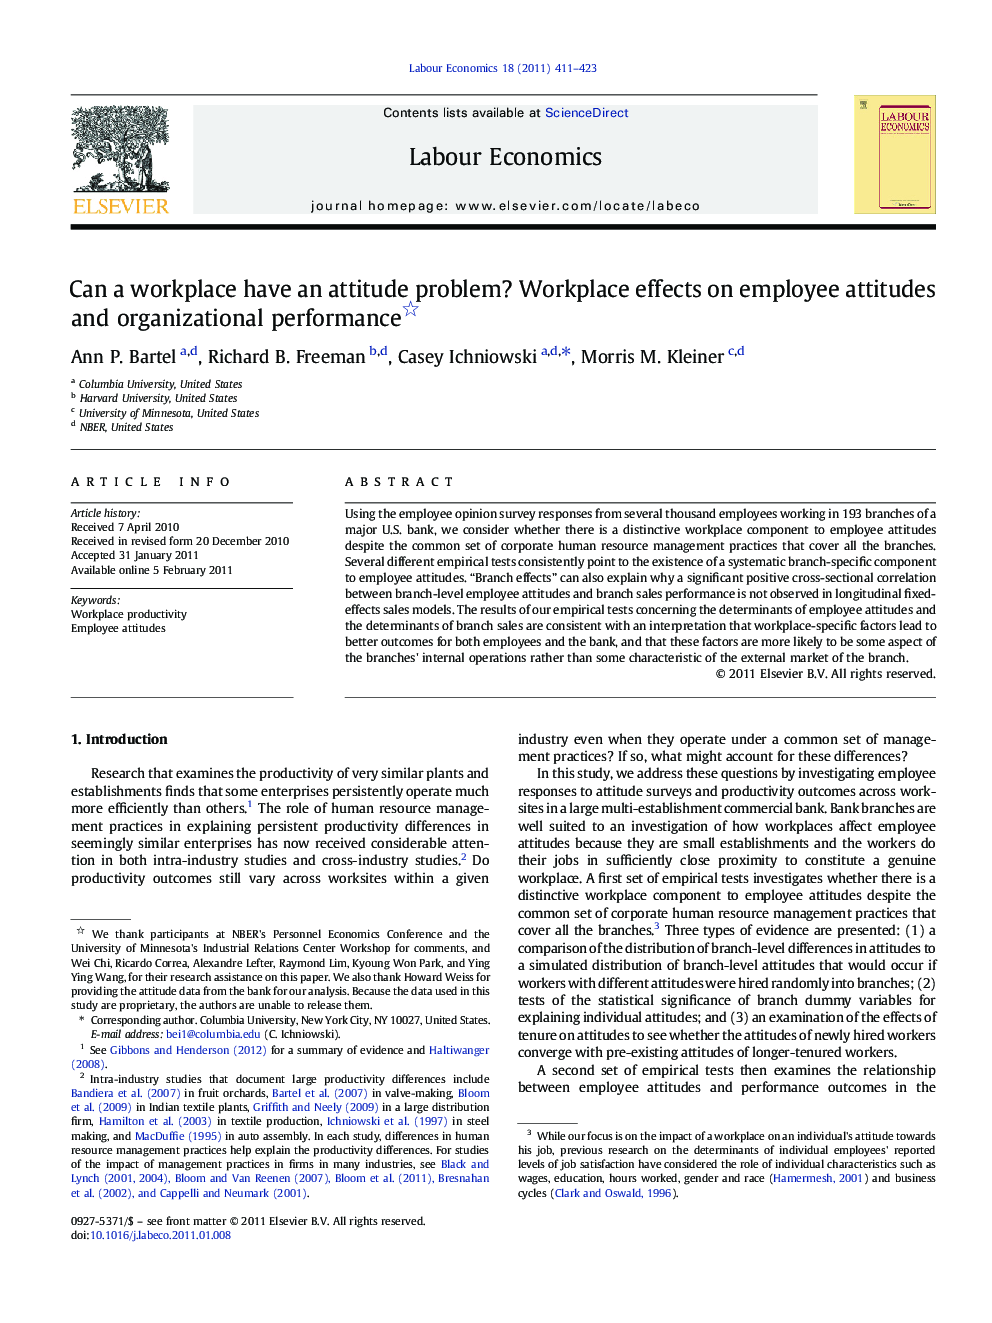 Can a workplace have an attitude problem? Workplace effects on employee attitudes and organizational performance 